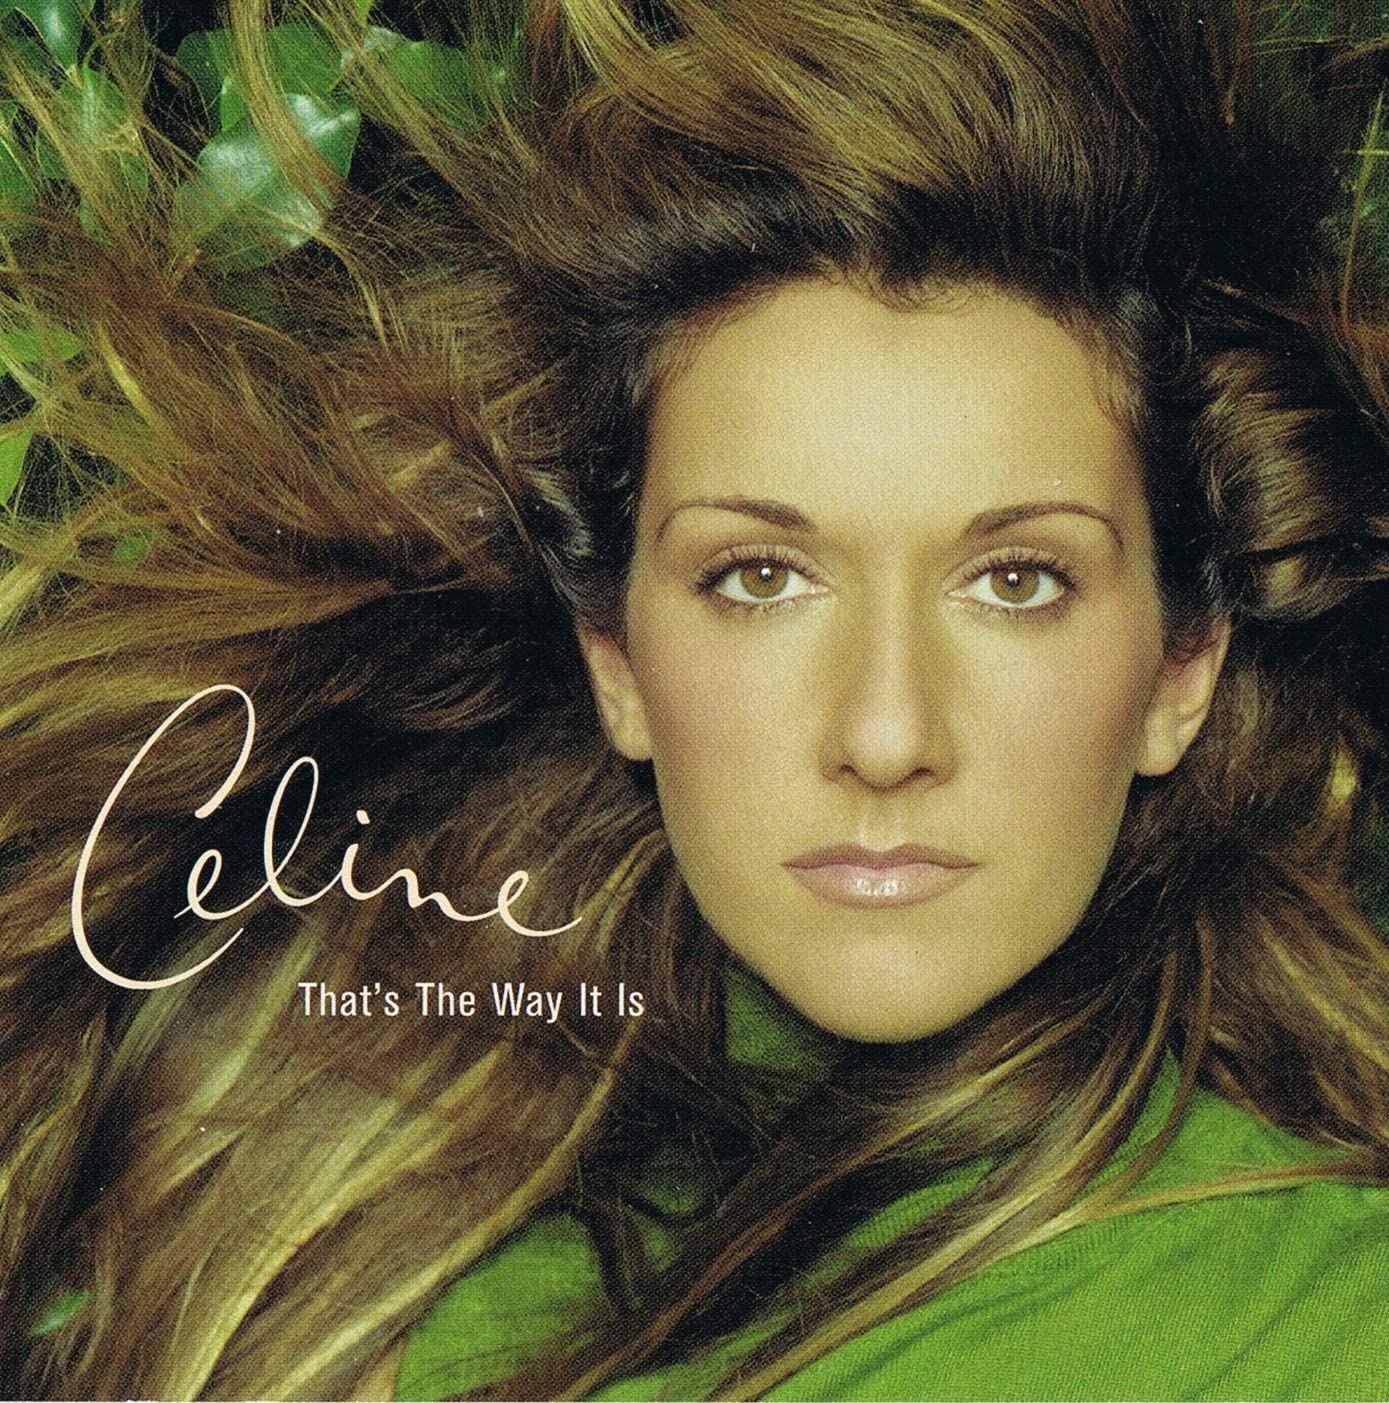 Celine Dion SINGLE / That's the way it is (BKS 46423) (1 song only: 4:01 Minutes) [Audio CD] Celine Dion